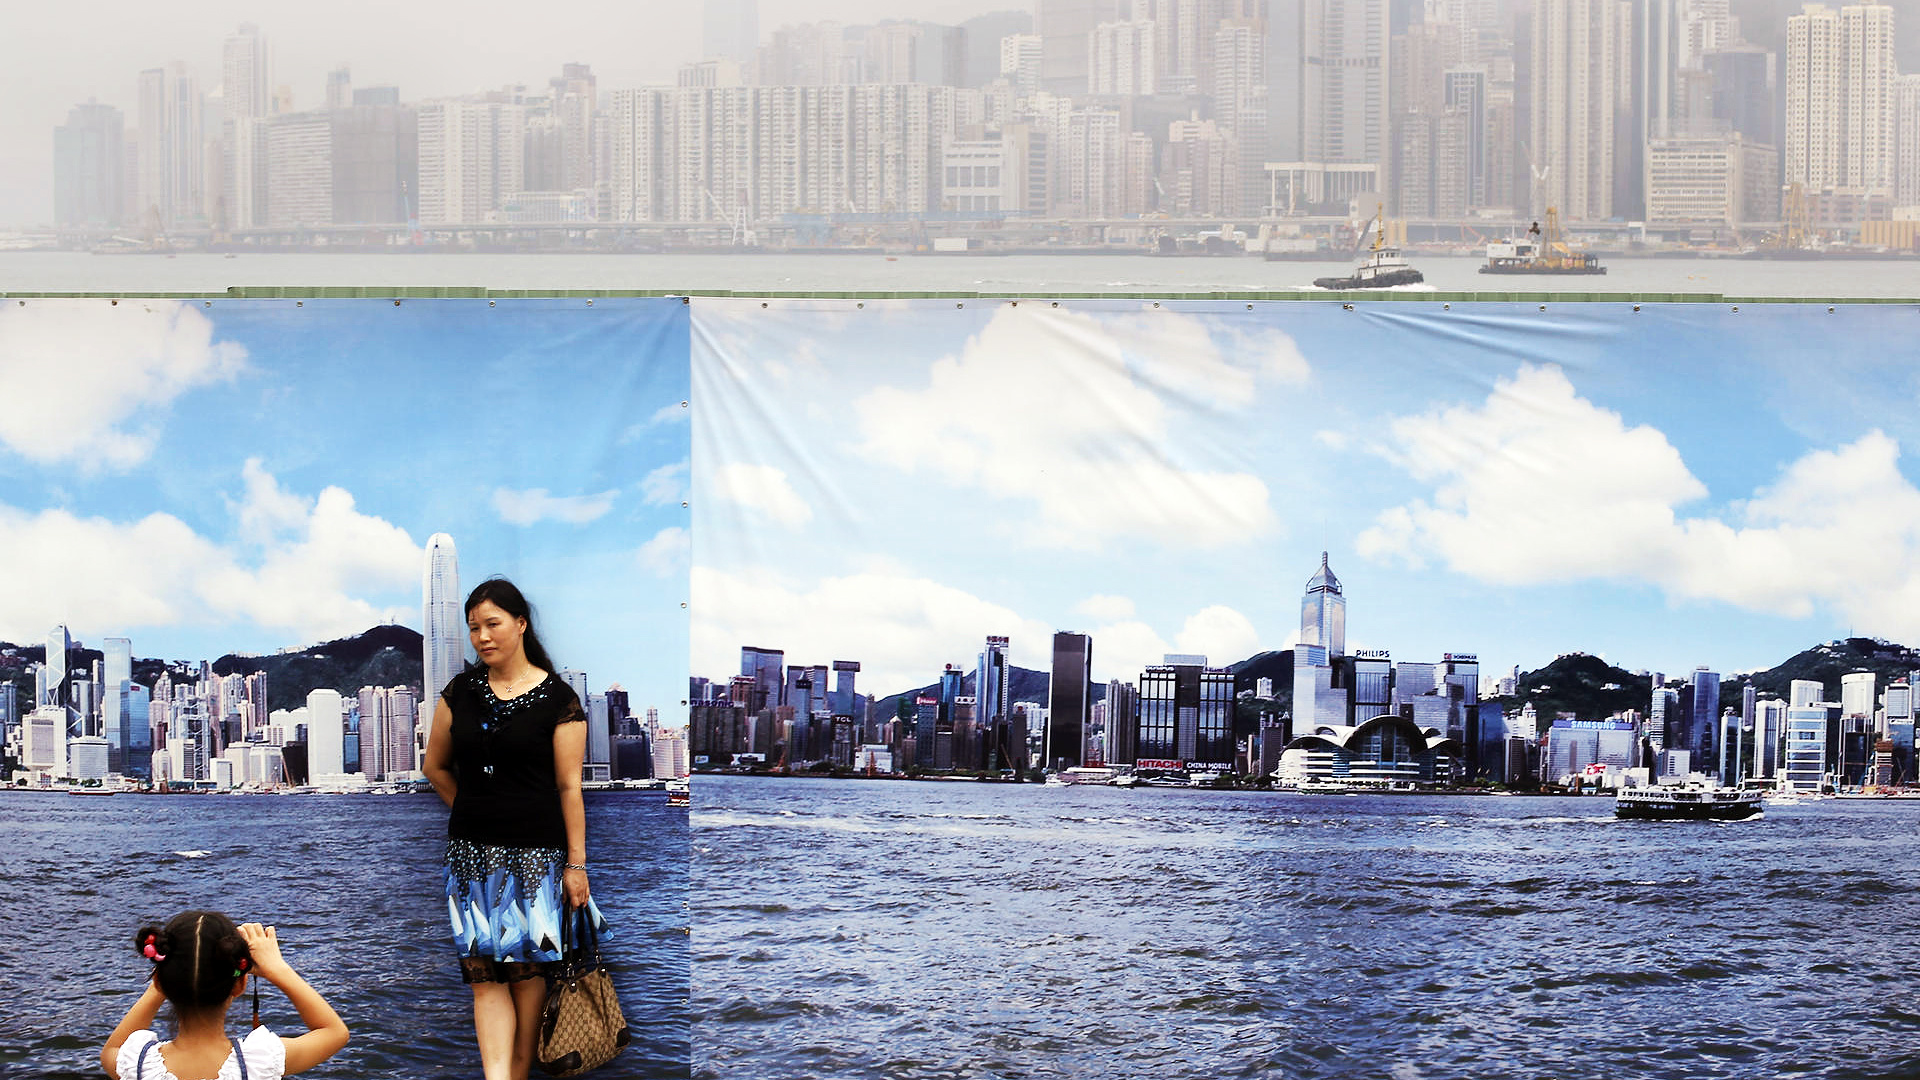 A banner showing an idyllic harbour view belies the true picture behind. The air-pollution index on that day, August 22 last year, was at "very high", with the city blanketed in haze. Photos; Sam Tsang; May Tse; K.Y. Cheng; David Wong; AFP; Will Hayward/courtesy of the Haywood family; courtesy of the Brinner family